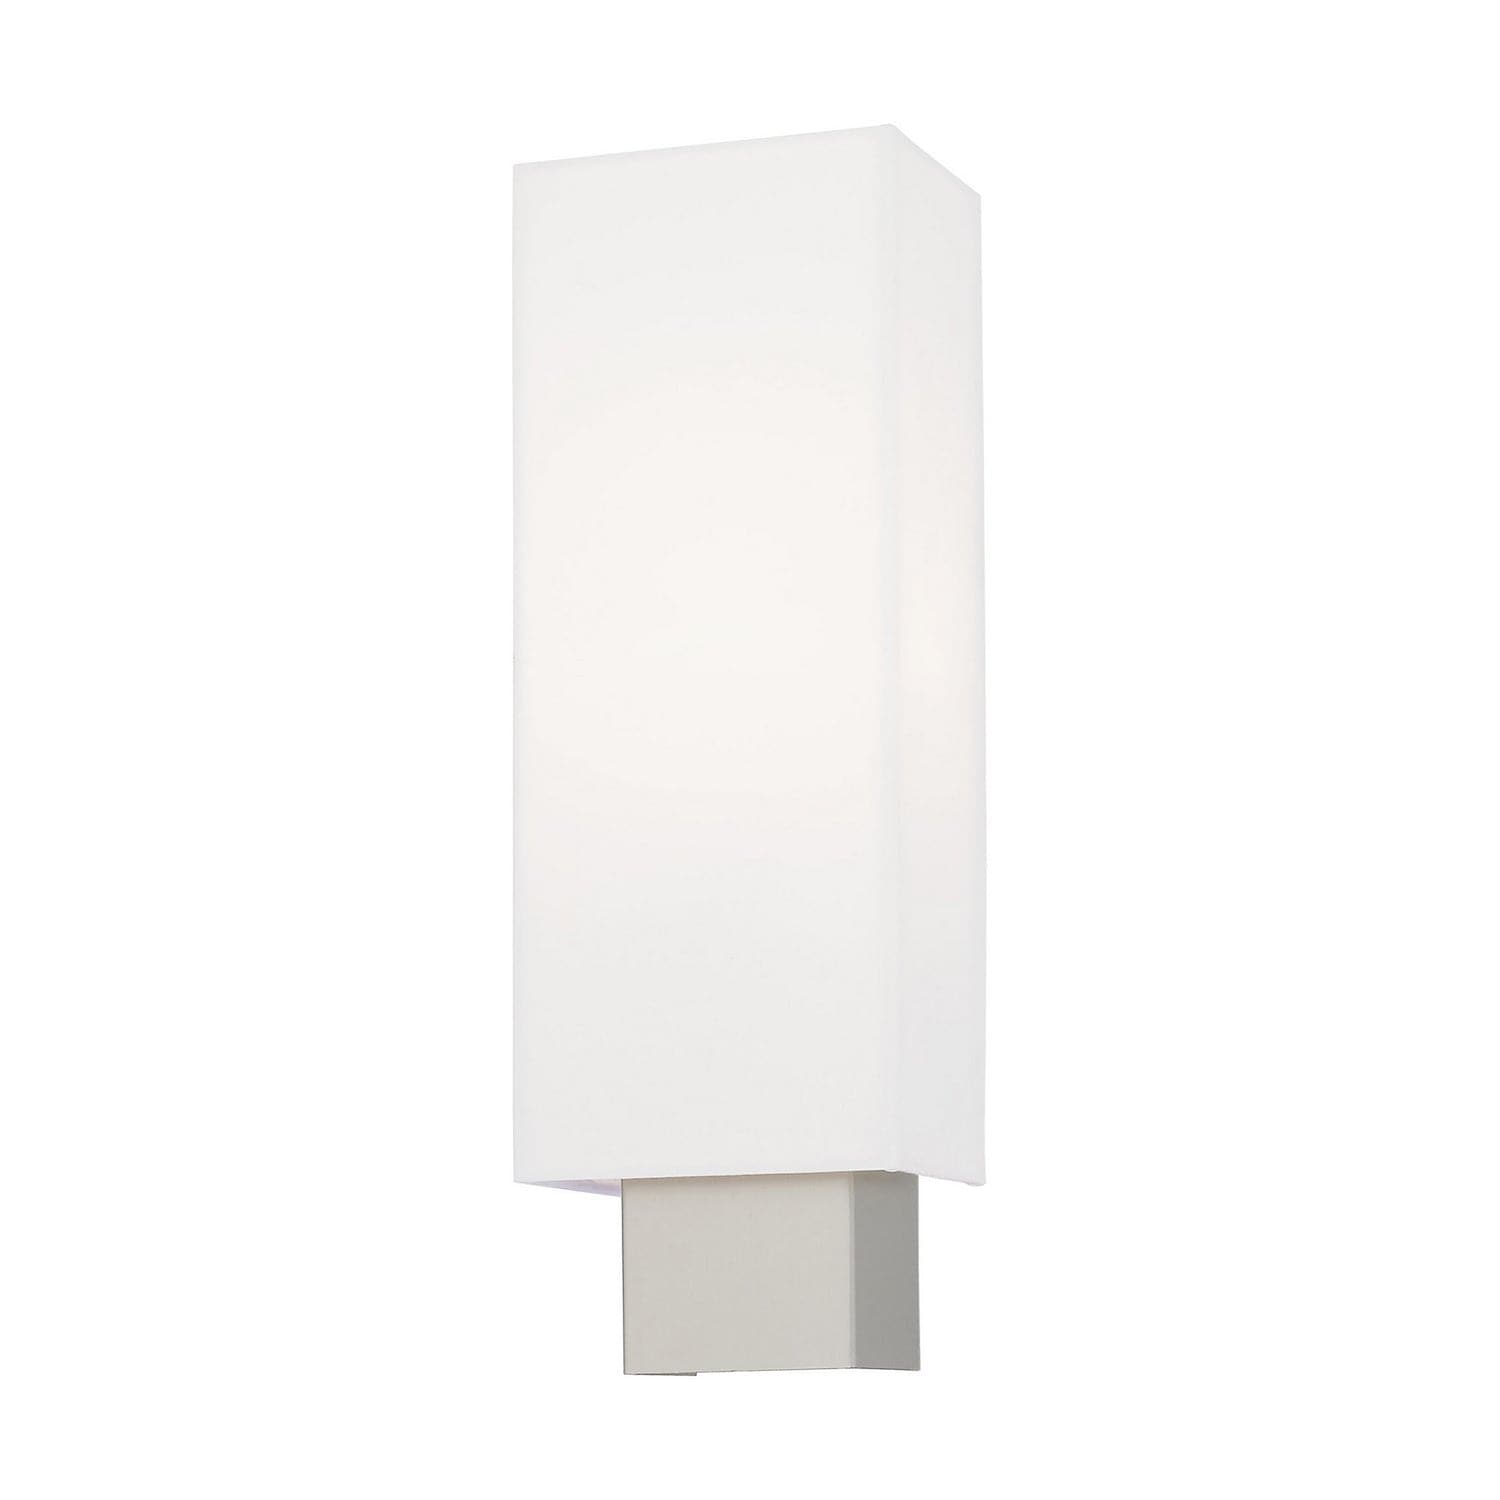 Livex Lighting - 41092-91 - One Light Wall Sconce - ADA Wall Sconces - Brushed Nickel